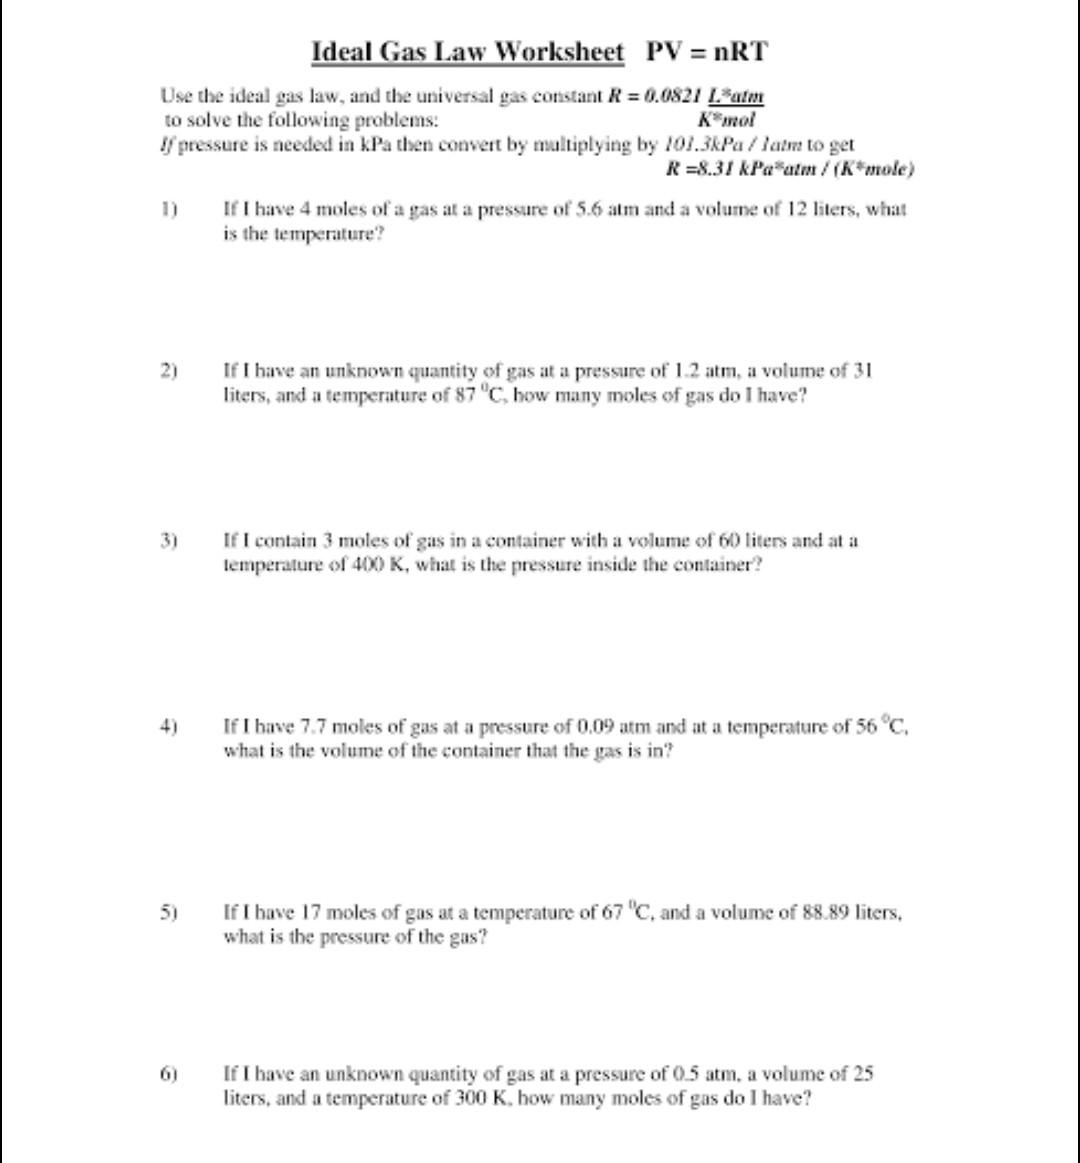 Ideal Gas Law Worksheet PV = nRT Use the ideal gas law, and the universal gas constant R = 0.0821 Latm to